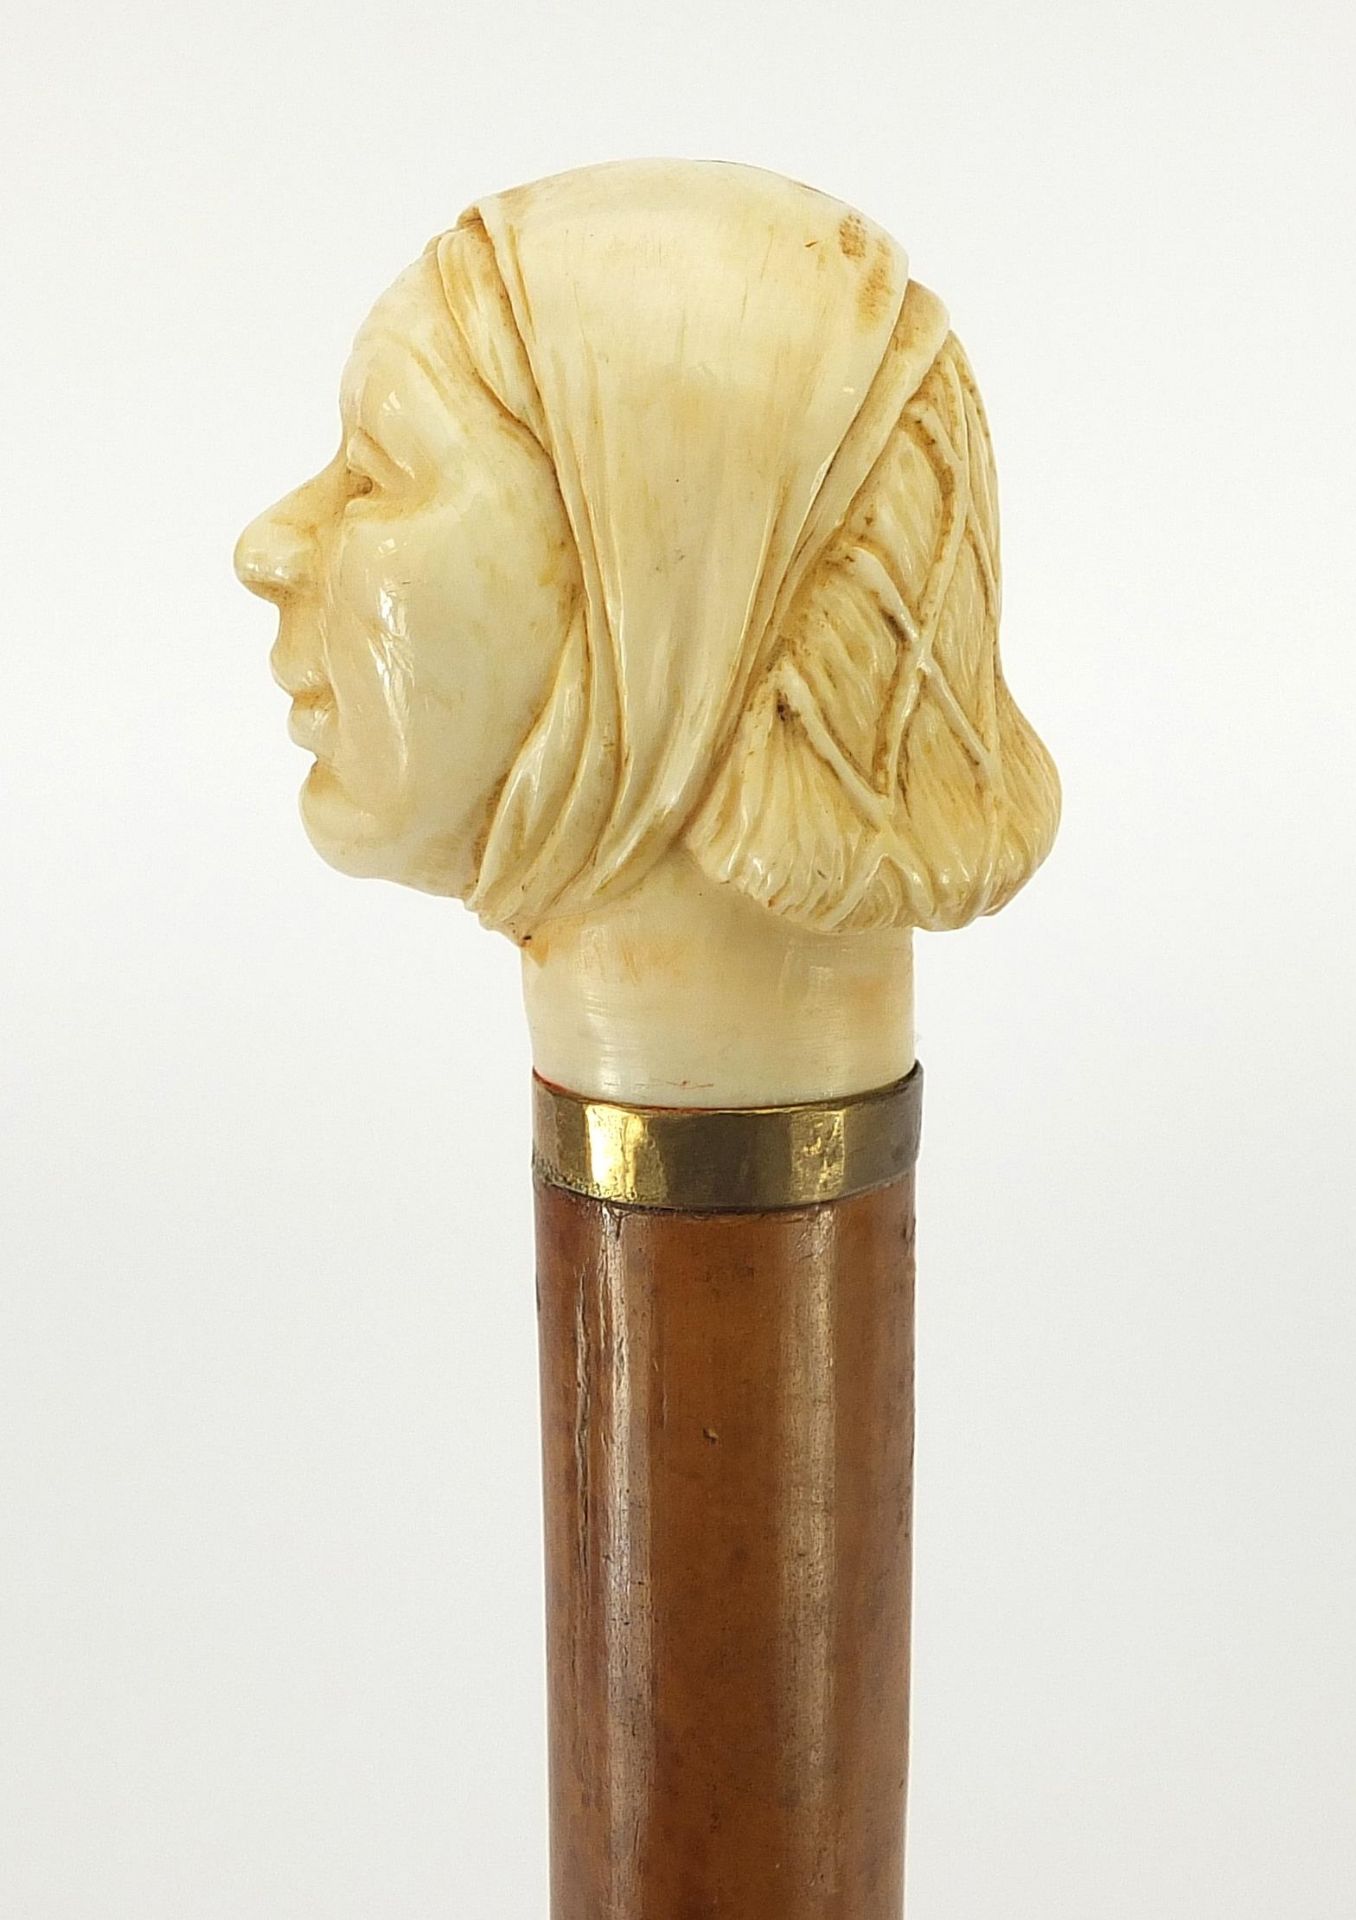 Hardwood and ebony walking stick with carved ivory pommel in the form of a lady's head, 90cm in - Image 5 of 8